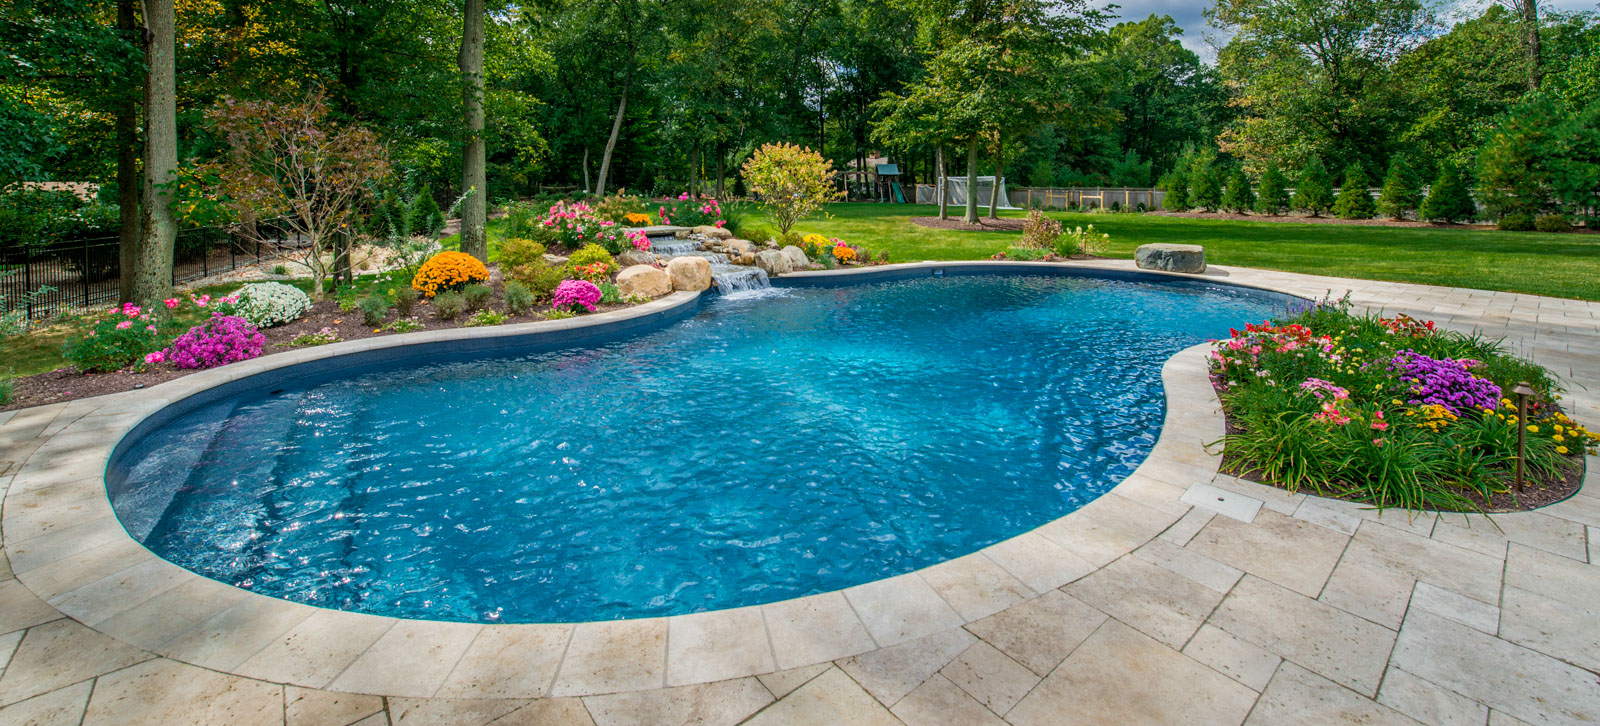 vinyl swimming pool with pool waterfall and flowers in pool landscape